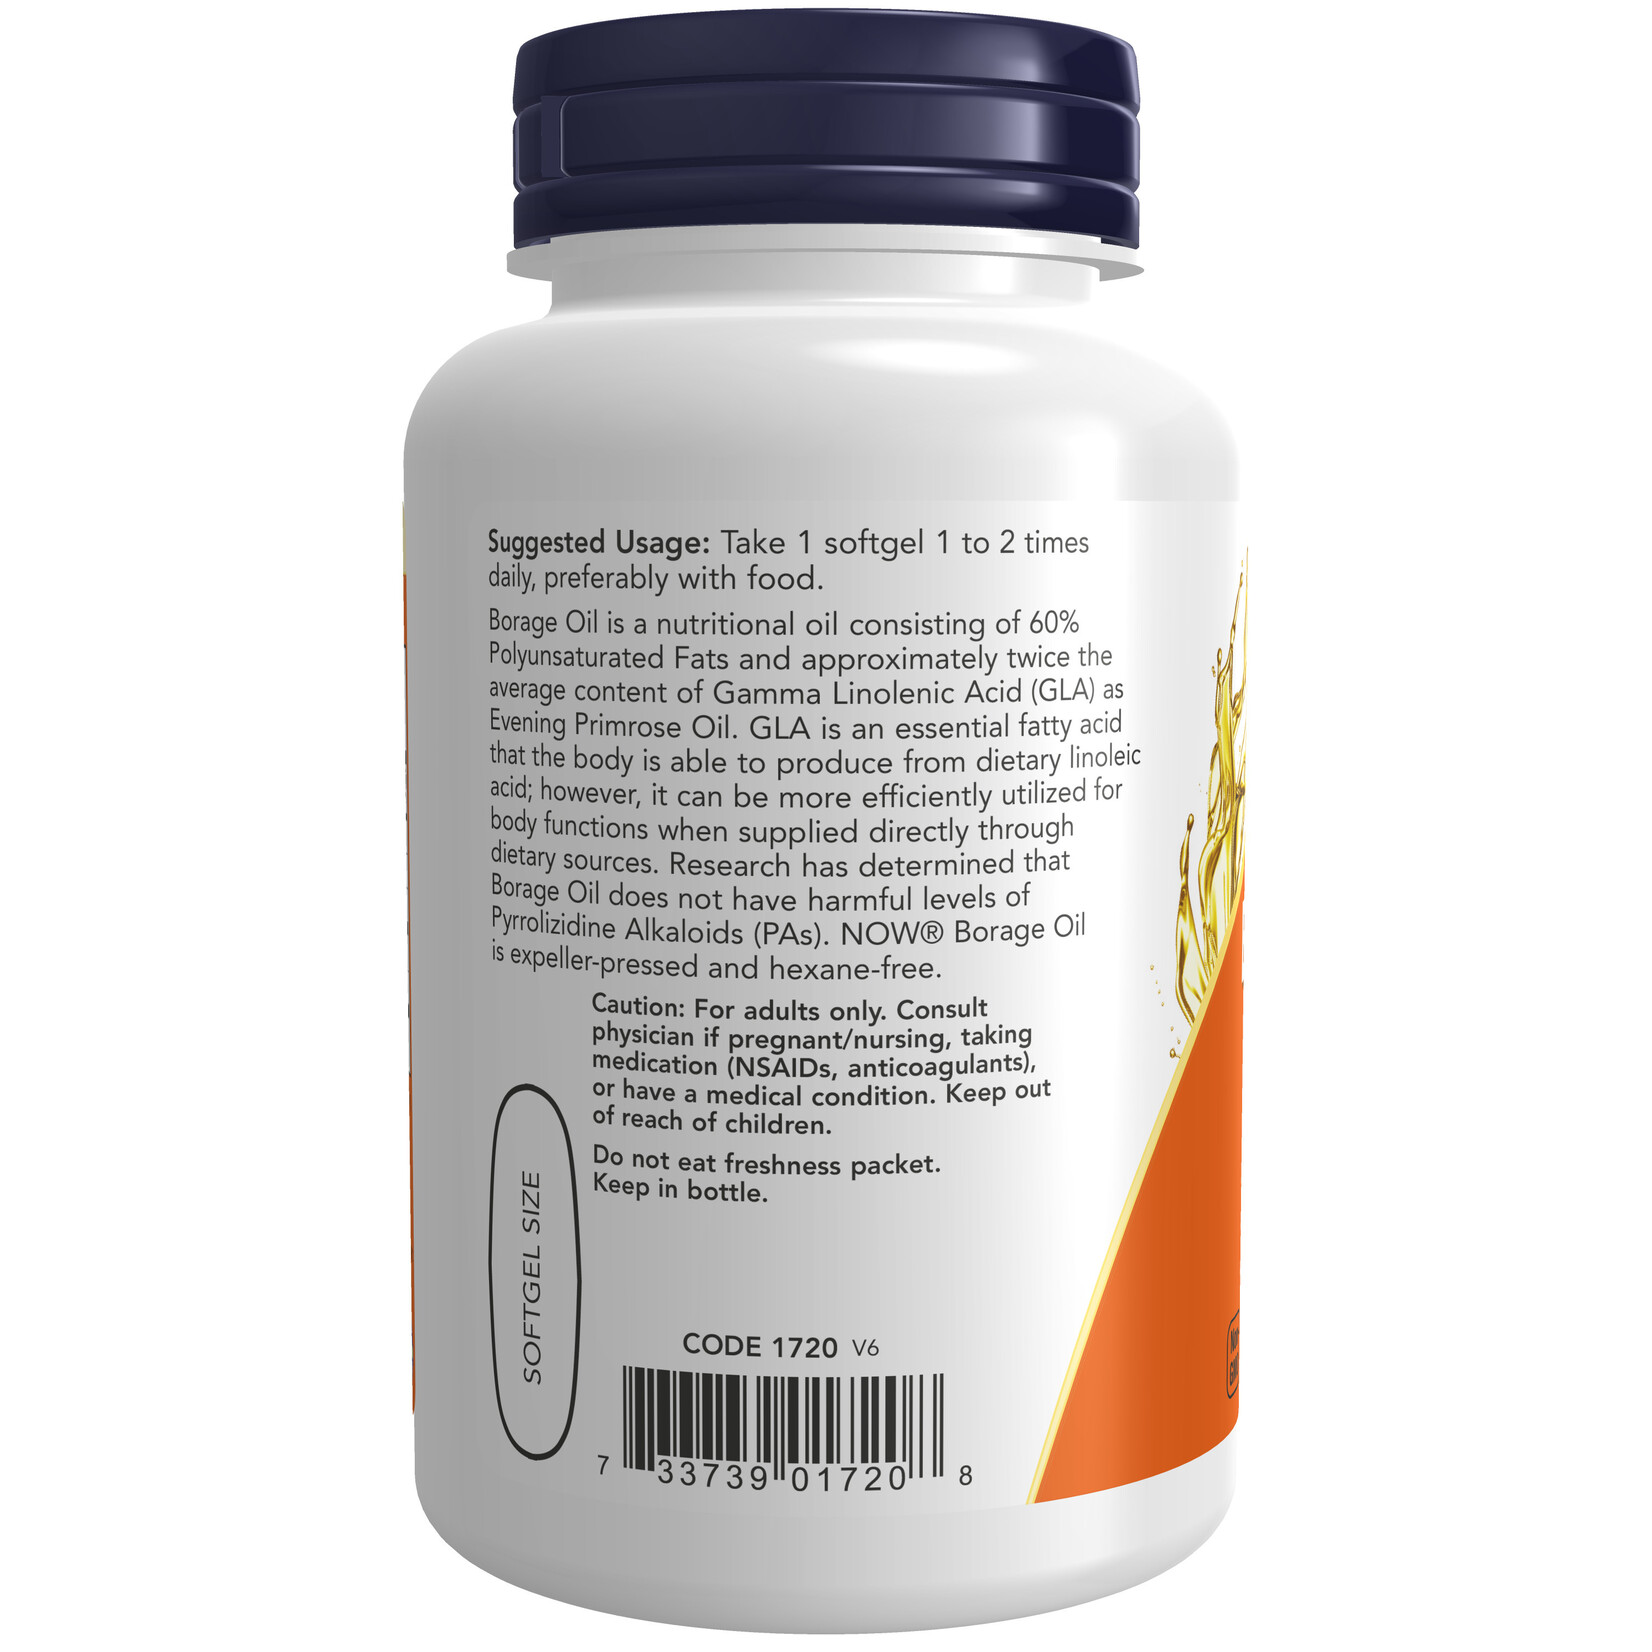 Now Now - Borage Oil 1000 mg - 60 Softgels